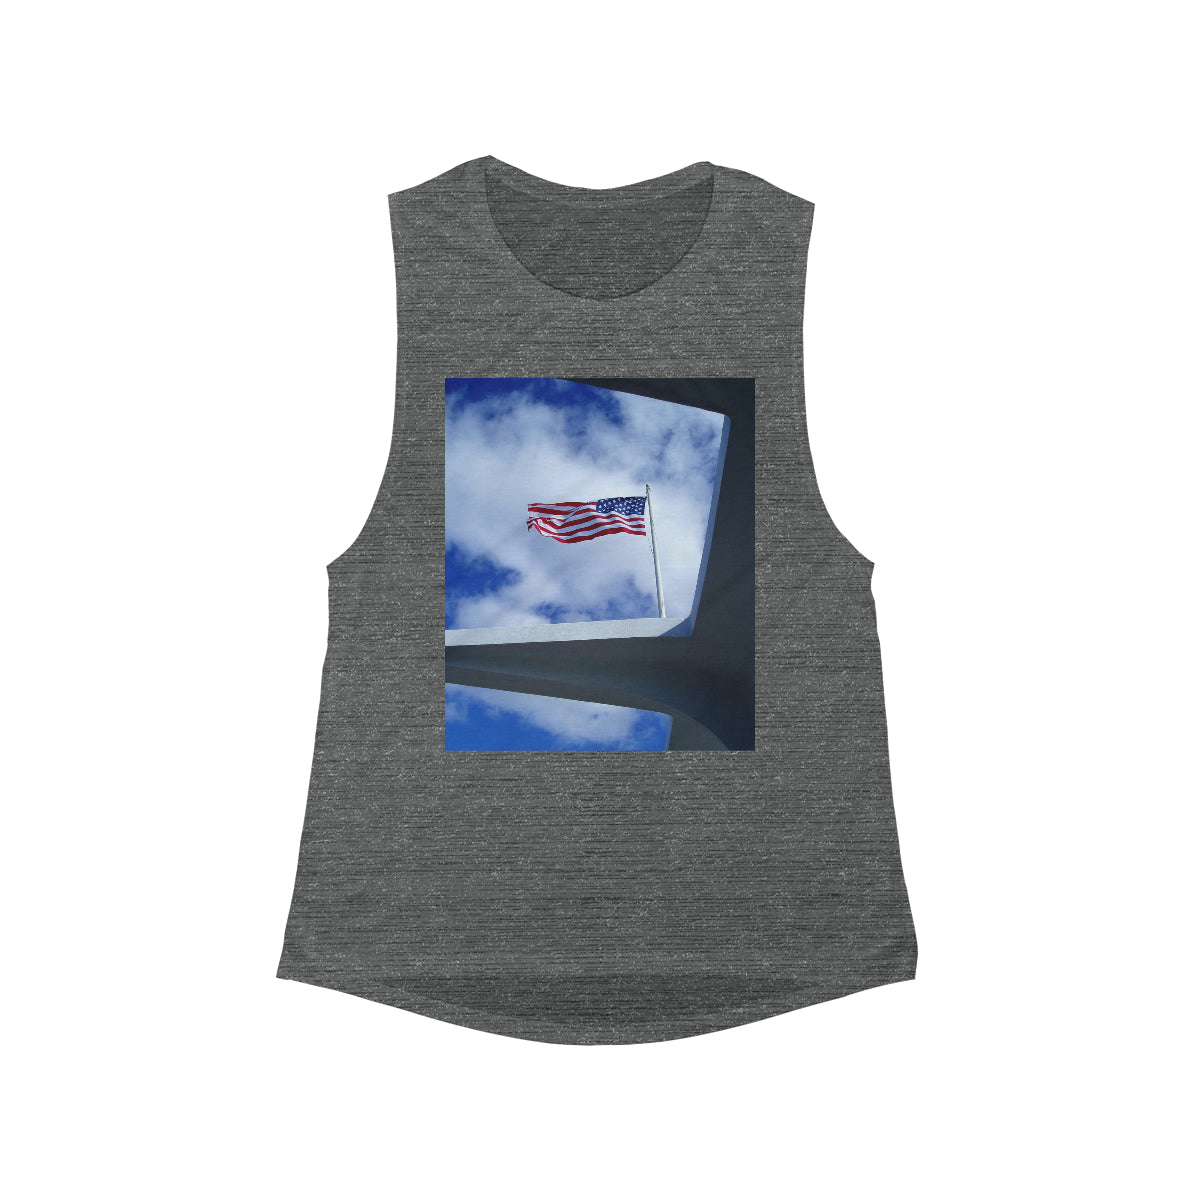 In Solemn Remembrance - Women's Flowy Scoop Muscle Tank - Fry1Productions